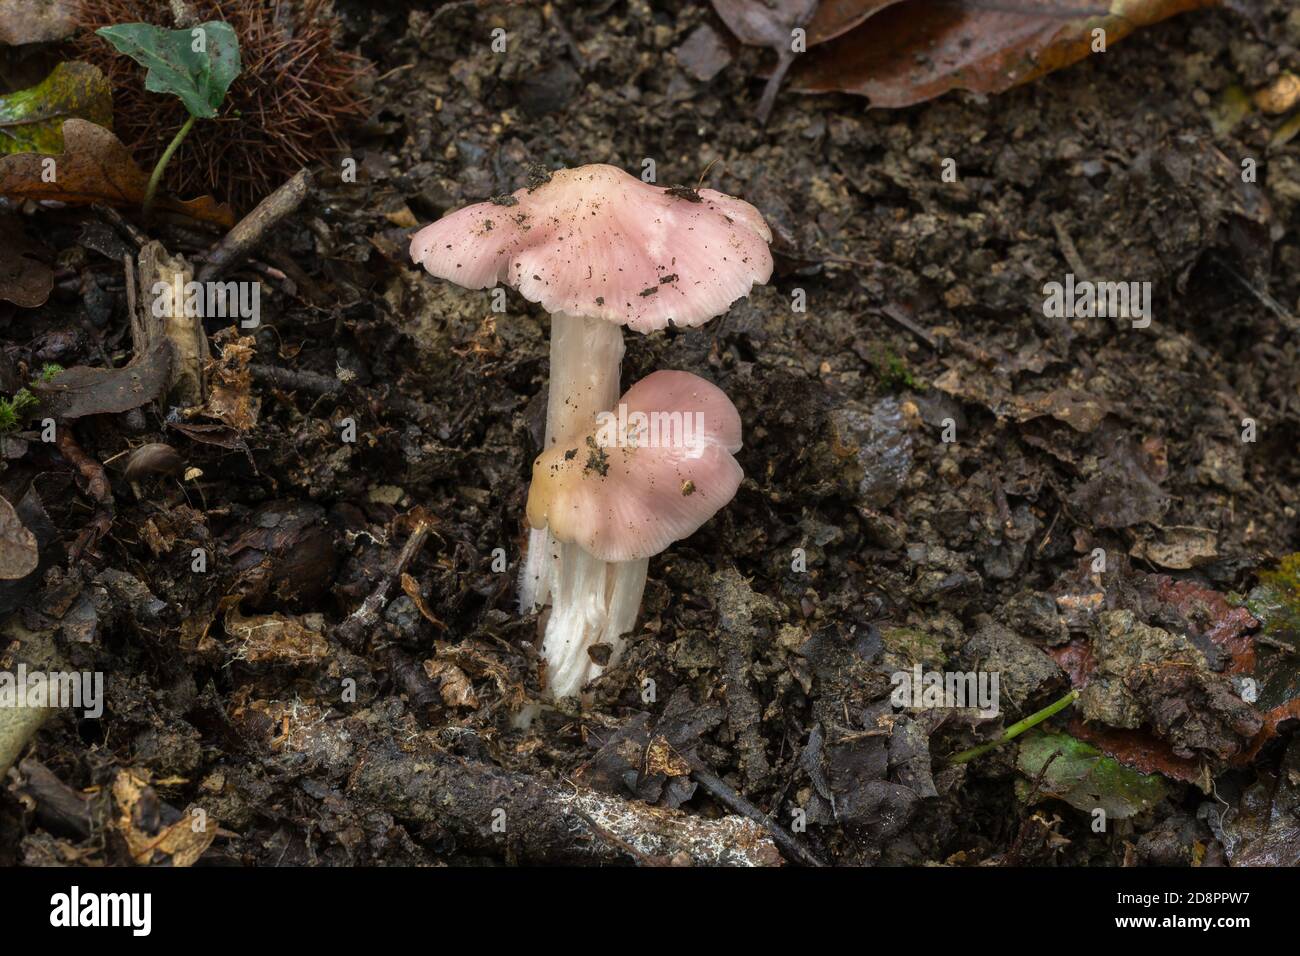 Possibly a young 'sickner' or Russula emetica mushroom. Stock Photo